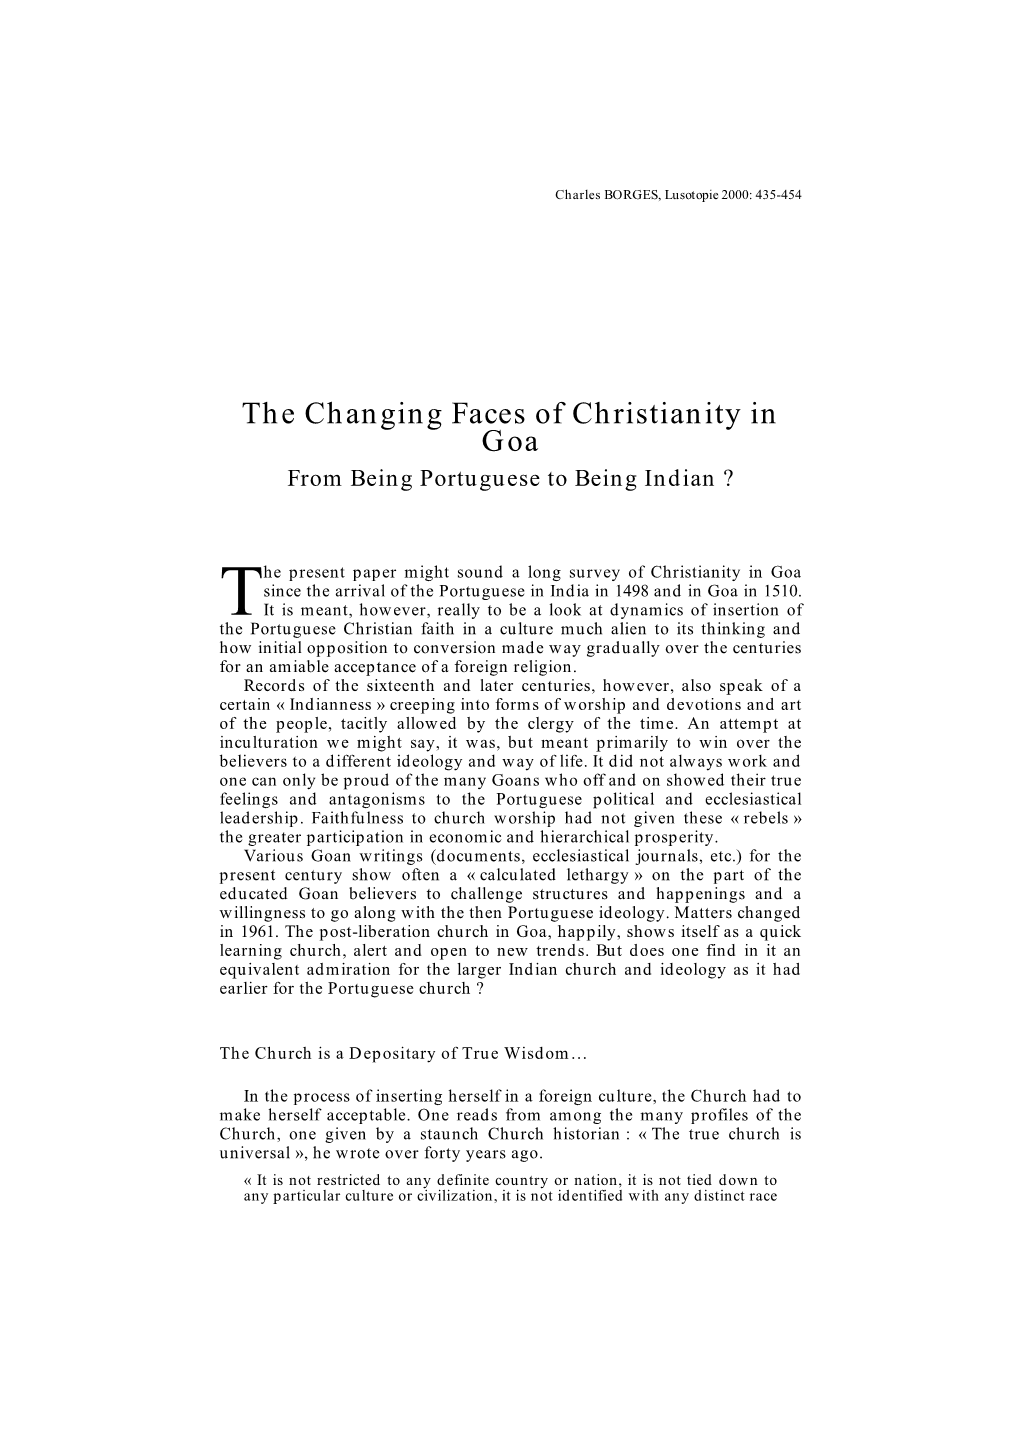 The Changing Faces of Christianity in Goa from Being Portuguese to Being Indian ?